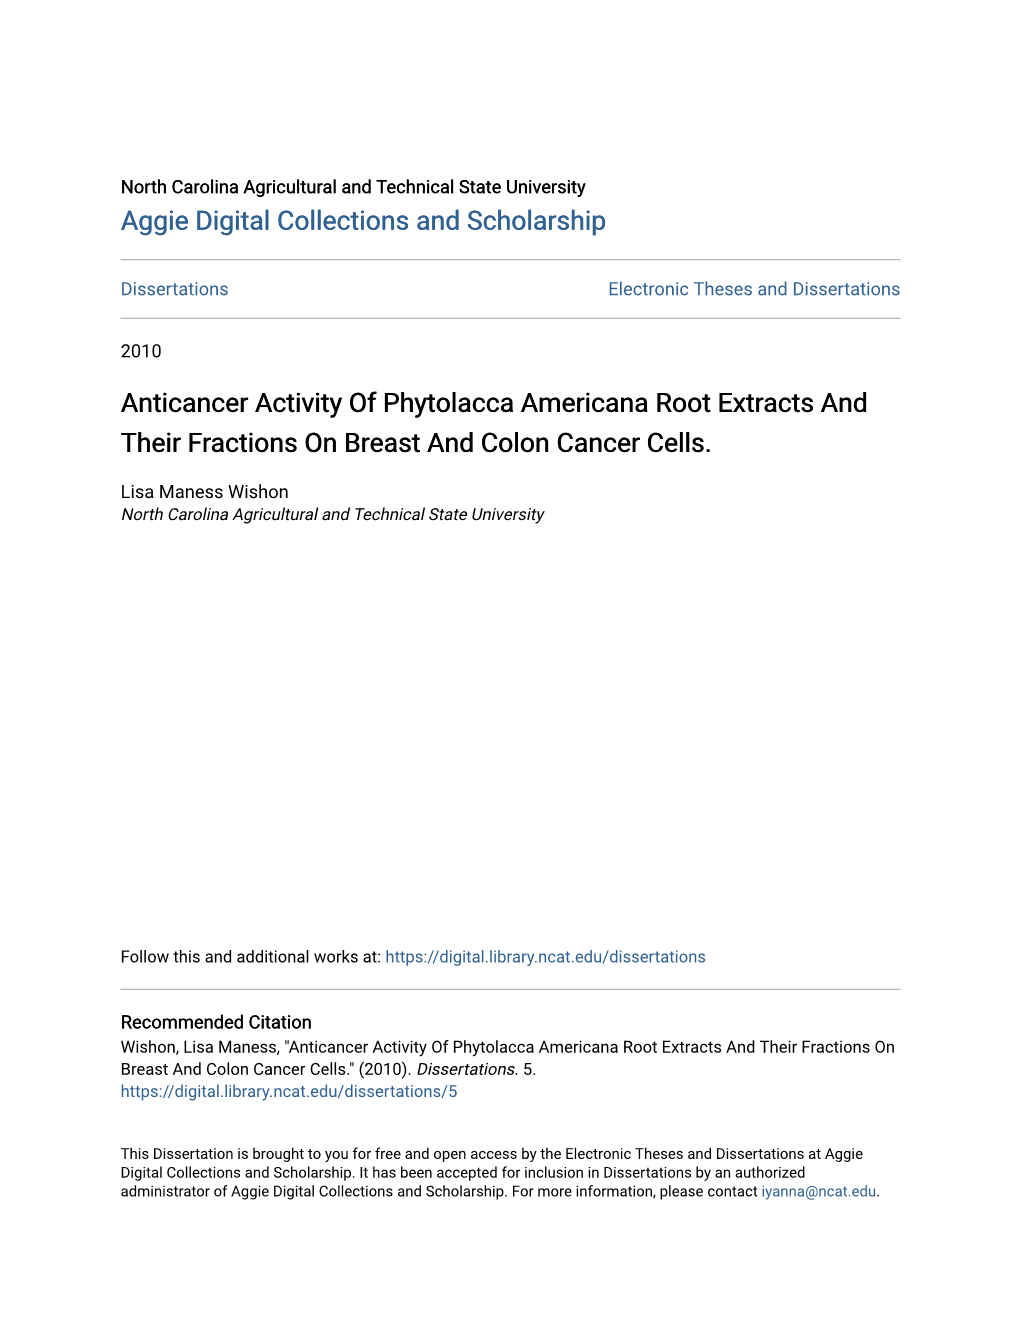 Anticancer Activity of Phytolacca Americana Root Extracts and Their Fractions on Breast and Colon Cancer Cells